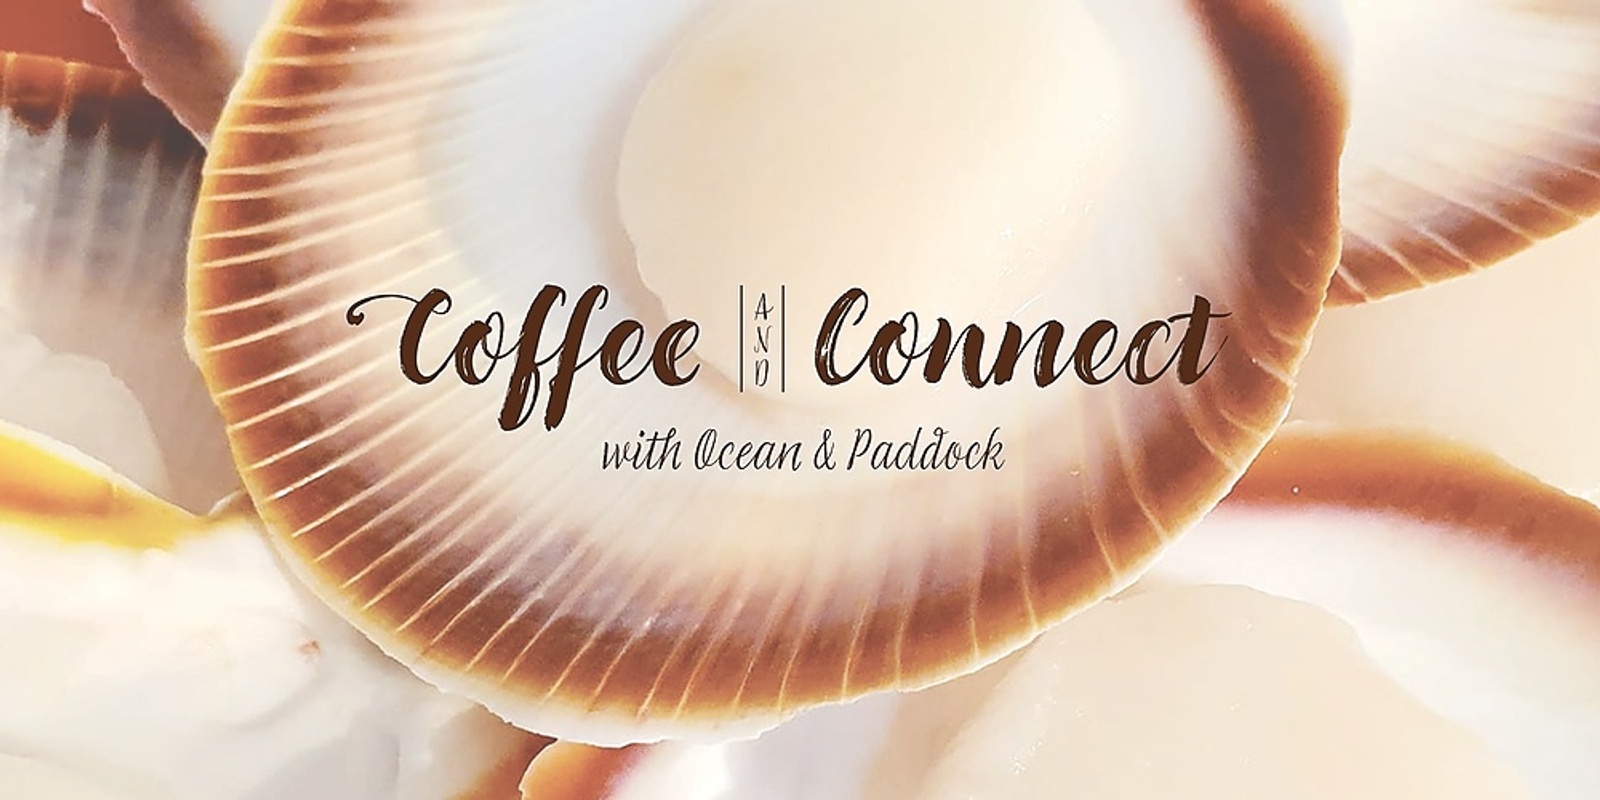 Coffee and Connect with Ocean & Paddock